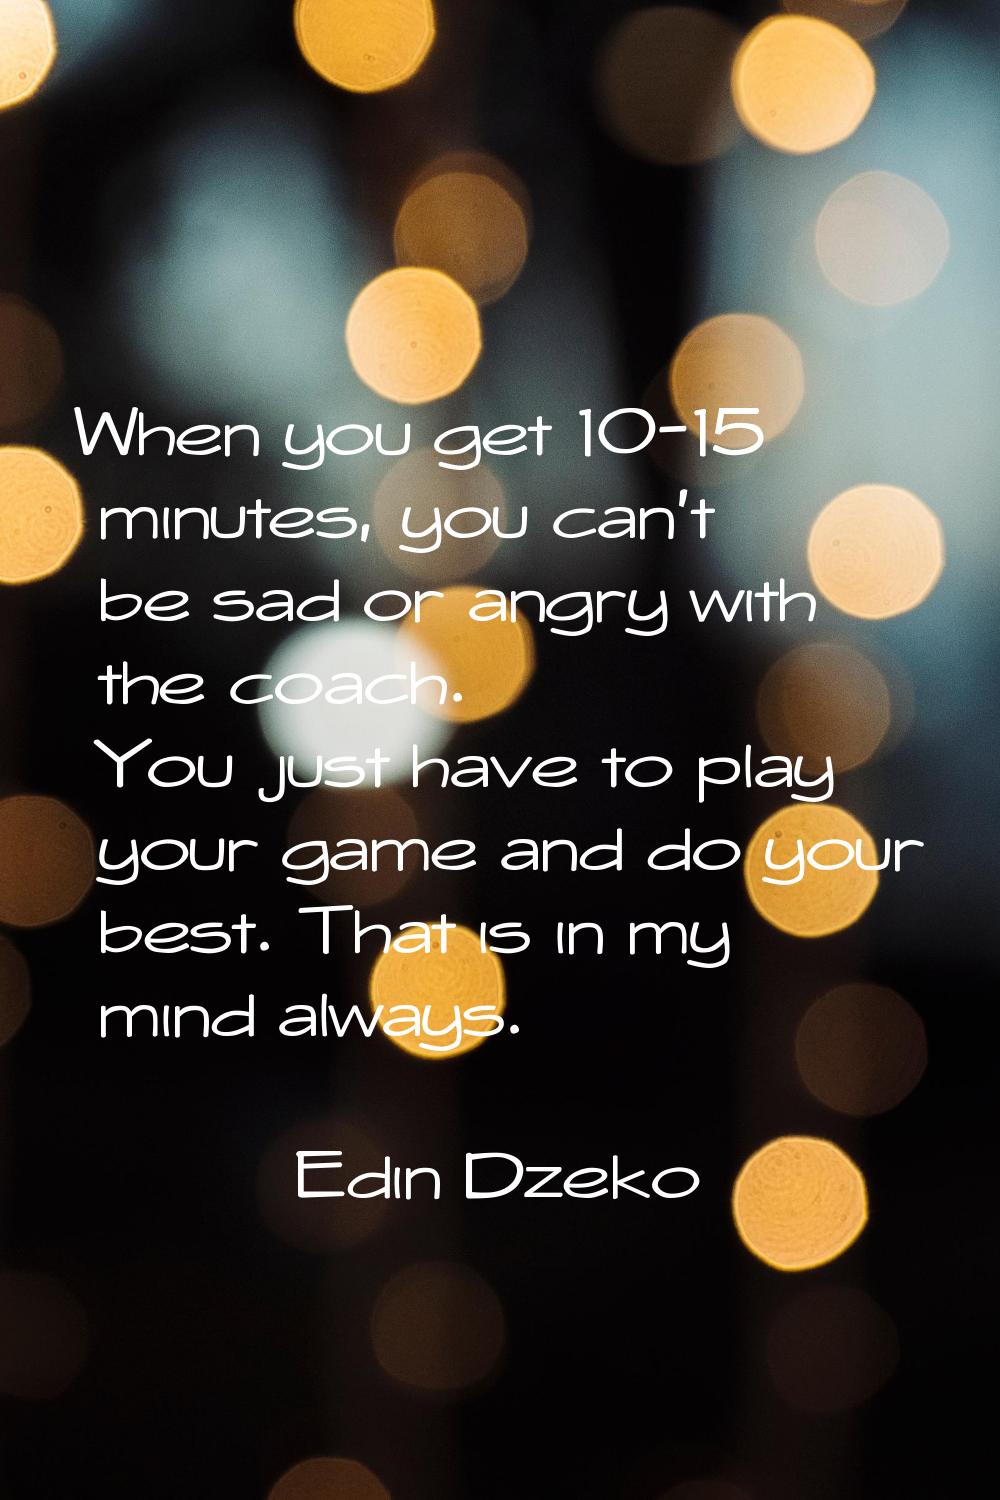 When you get 10-15 minutes, you can't be sad or angry with the coach. You just have to play your ga